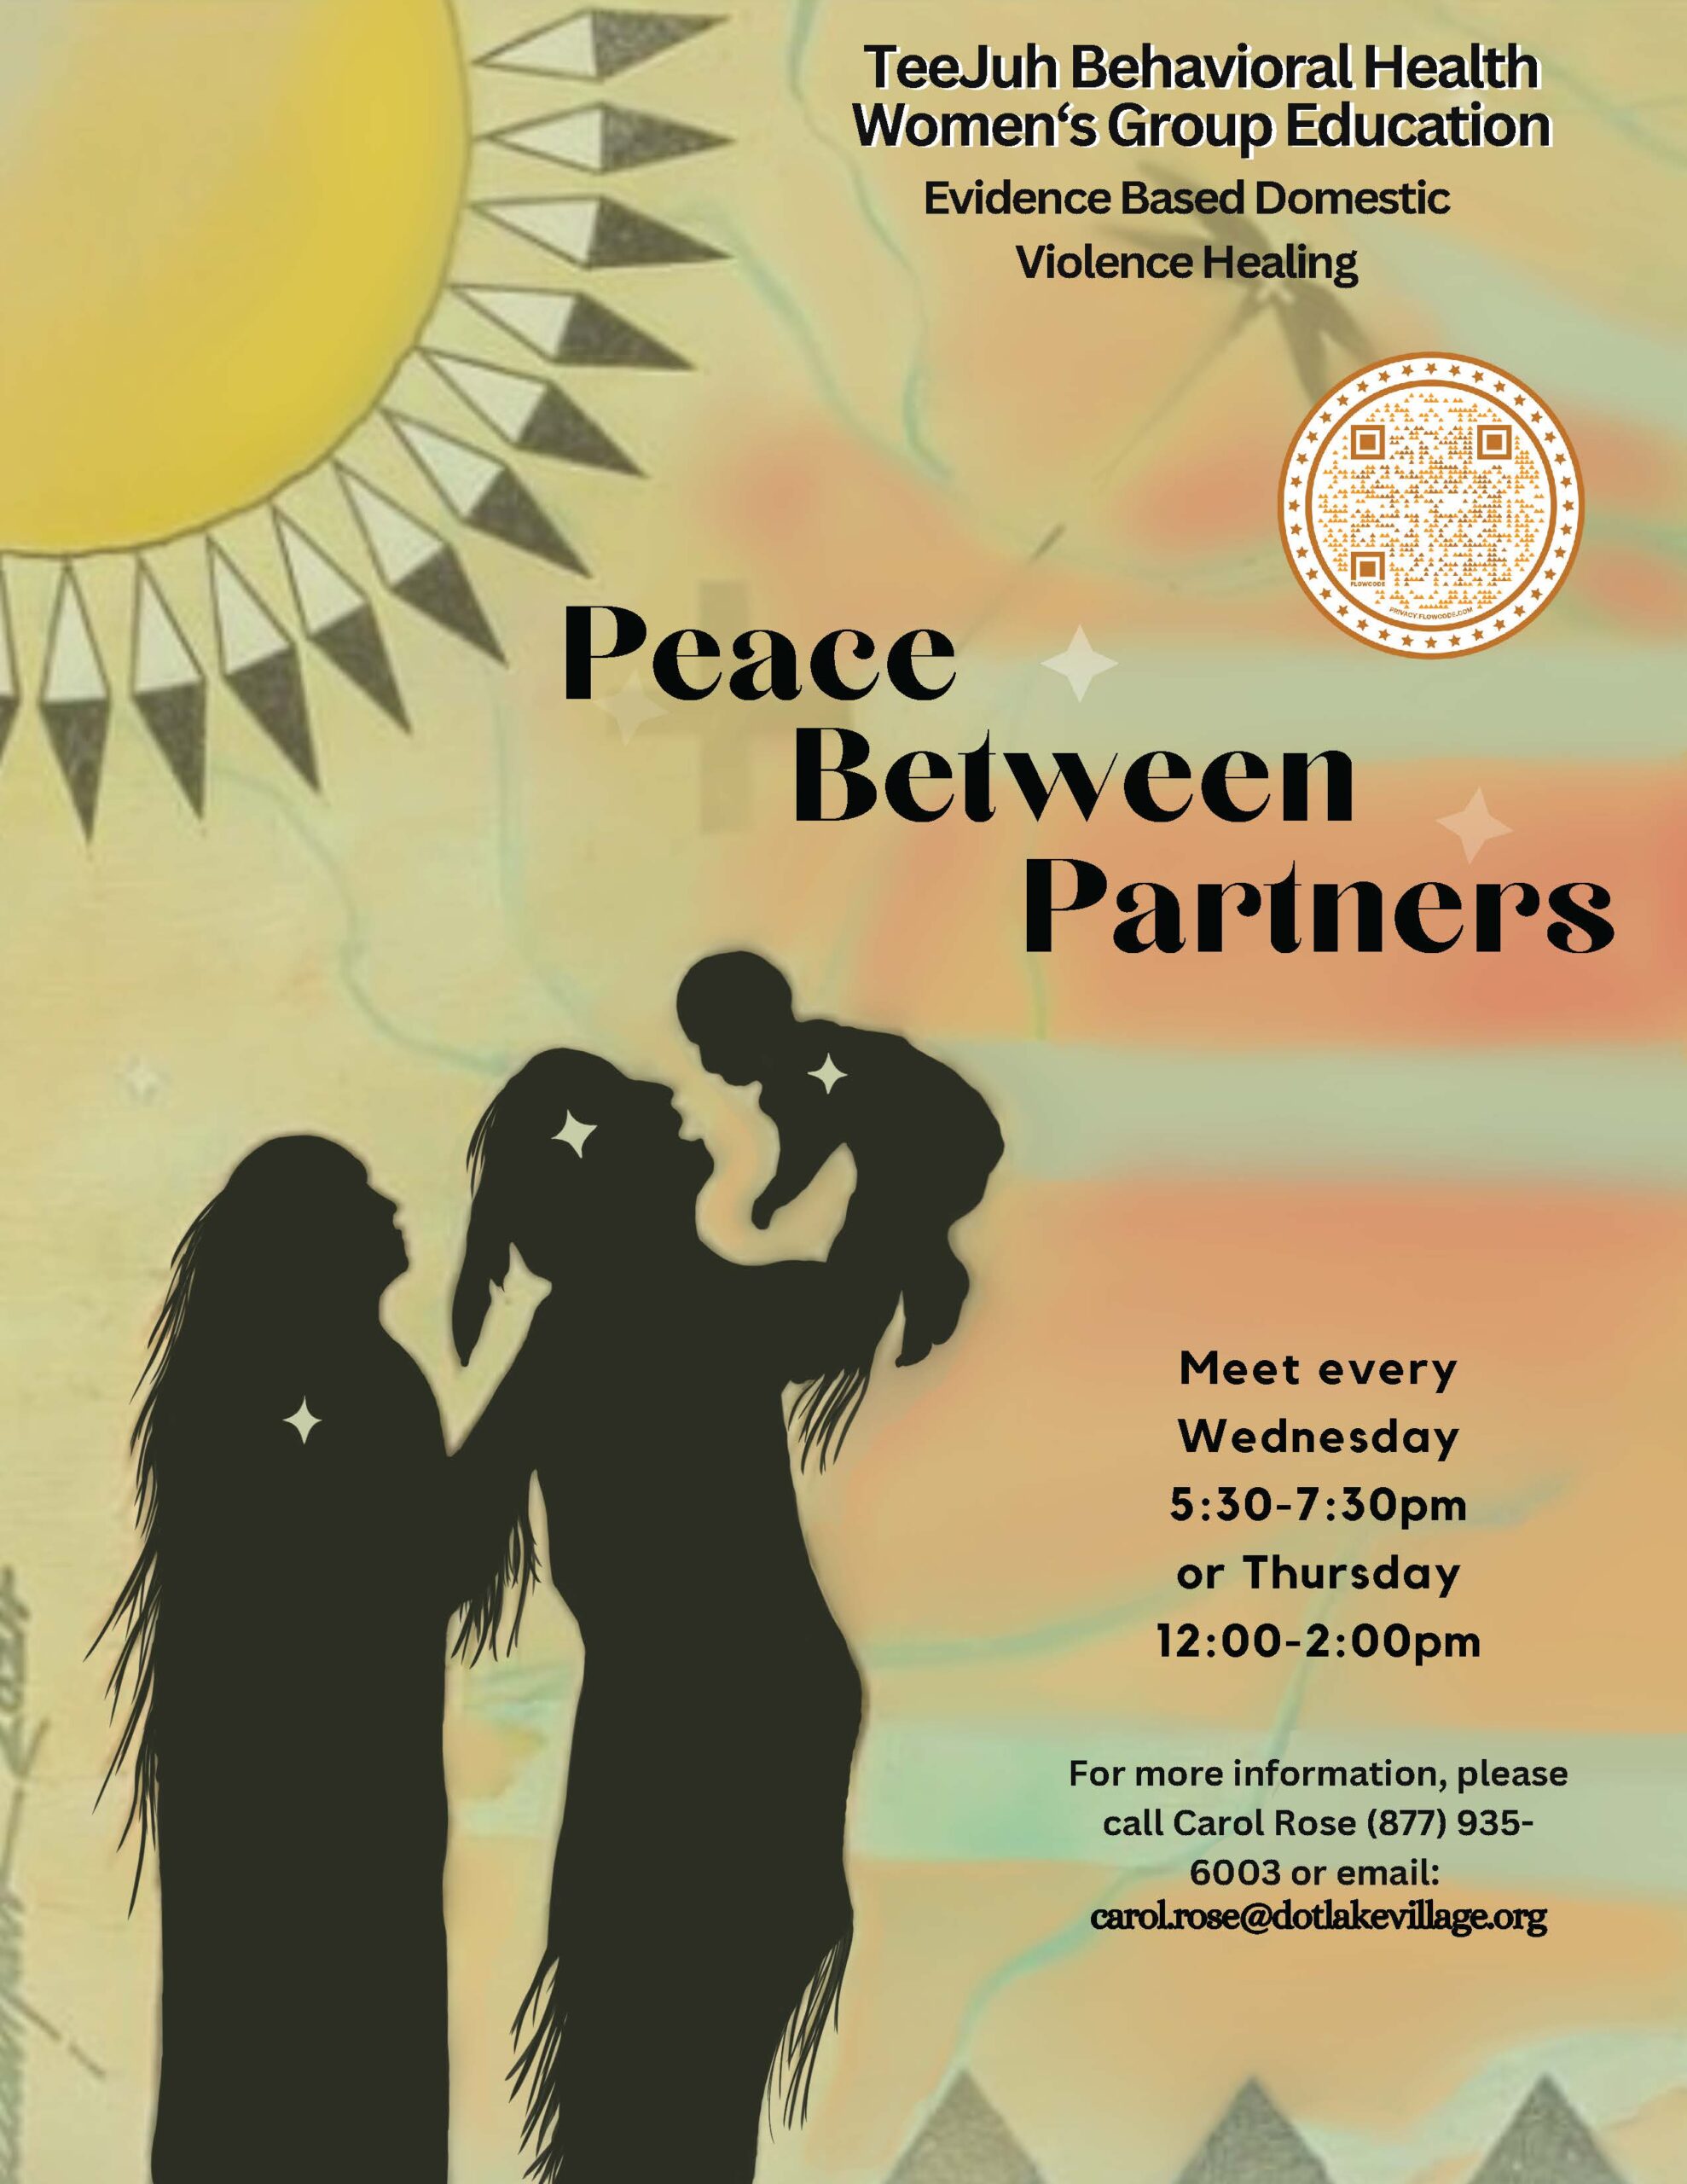 Peace Between Partners meets every Wednesday, 5:30-7:30 p.m., or Thursday, noon-2 p.m.